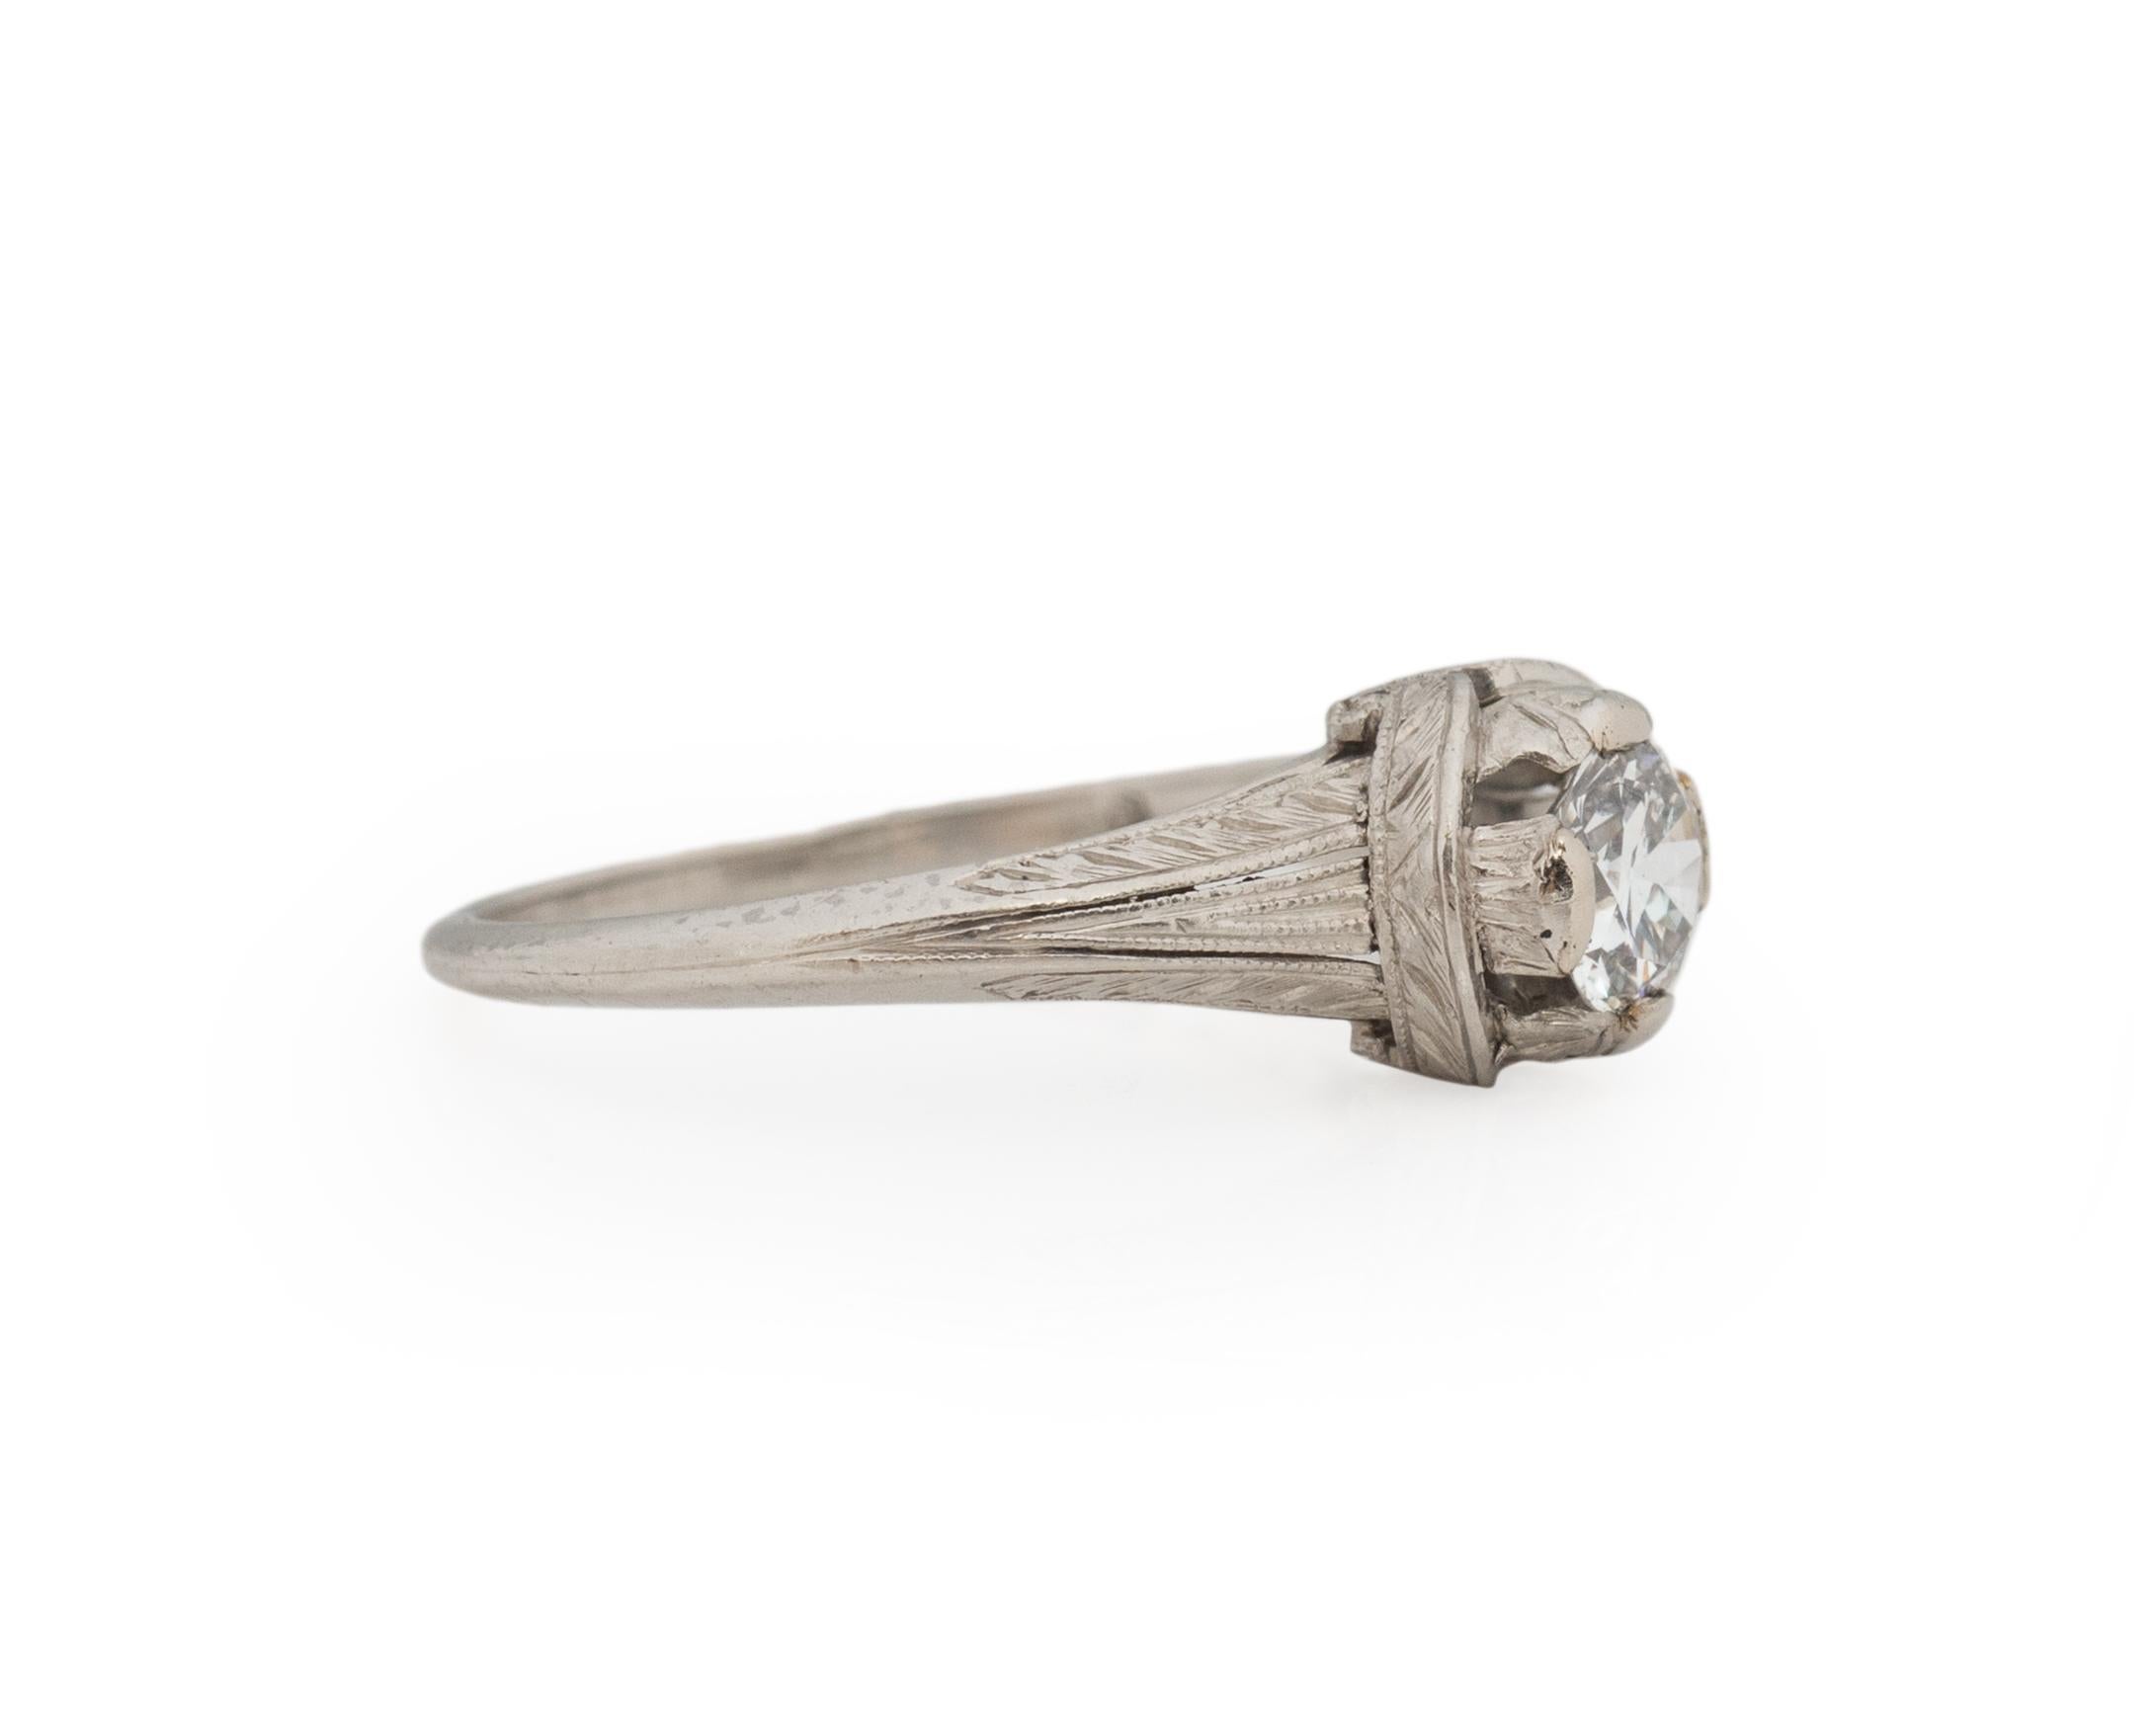 Ring Size: 5.75
Metal Type: Platinum [Hallmarked, and Tested]
Weight: 2.0 grams

Center Diamond Details:
GIA REPORT #:
Weight: .44ct
Cut: Old European brilliant
Color: F
Clarity: VS2

Finger to Top of Stone Measurement: 5mm
Condition: Excellent